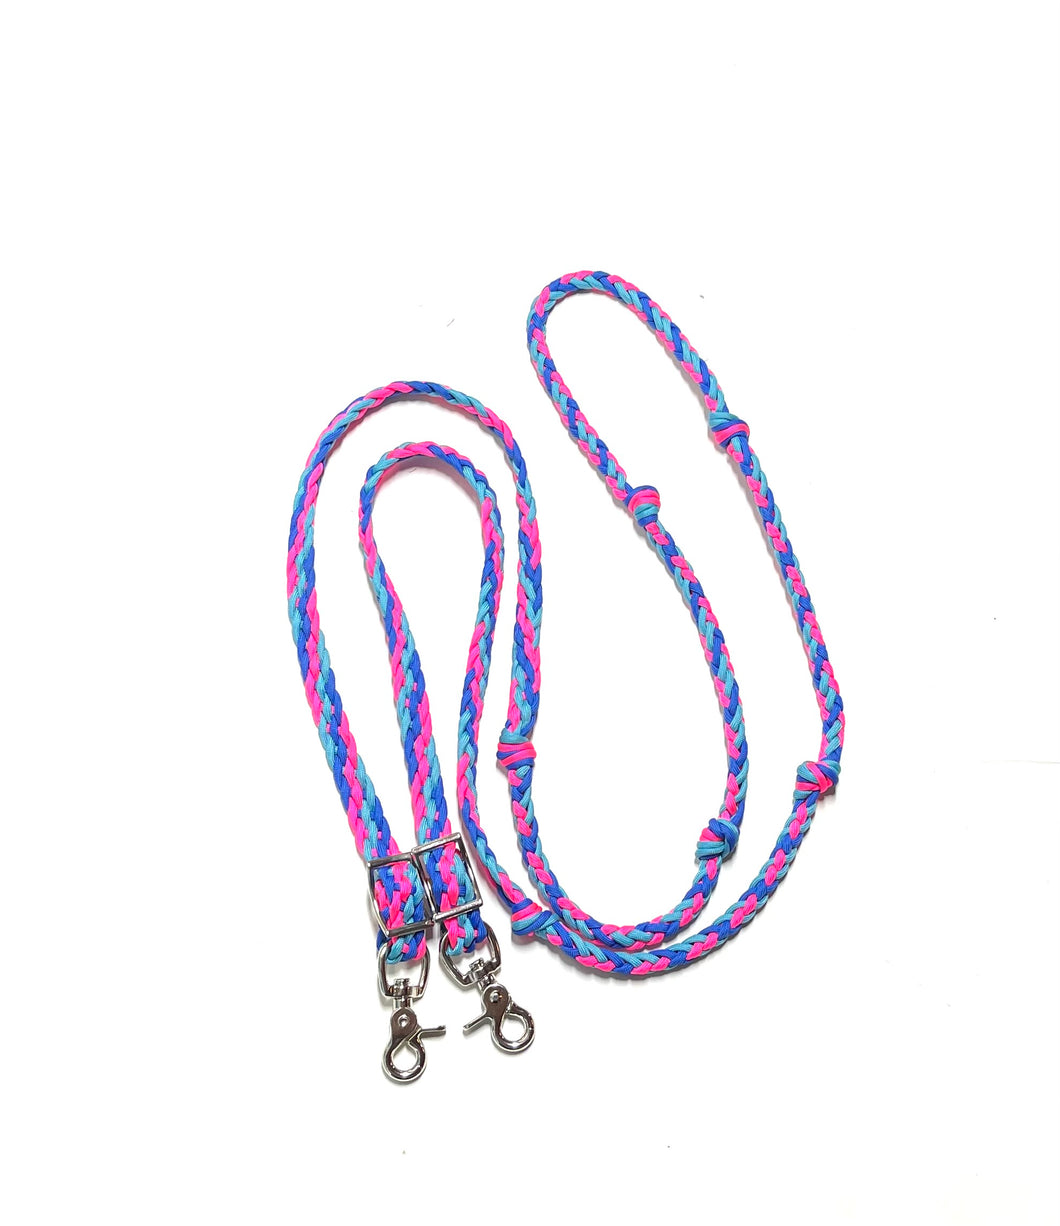 SALE barrel reins with  grip knots 8’ hot pink, royal blue, and neon turquoise